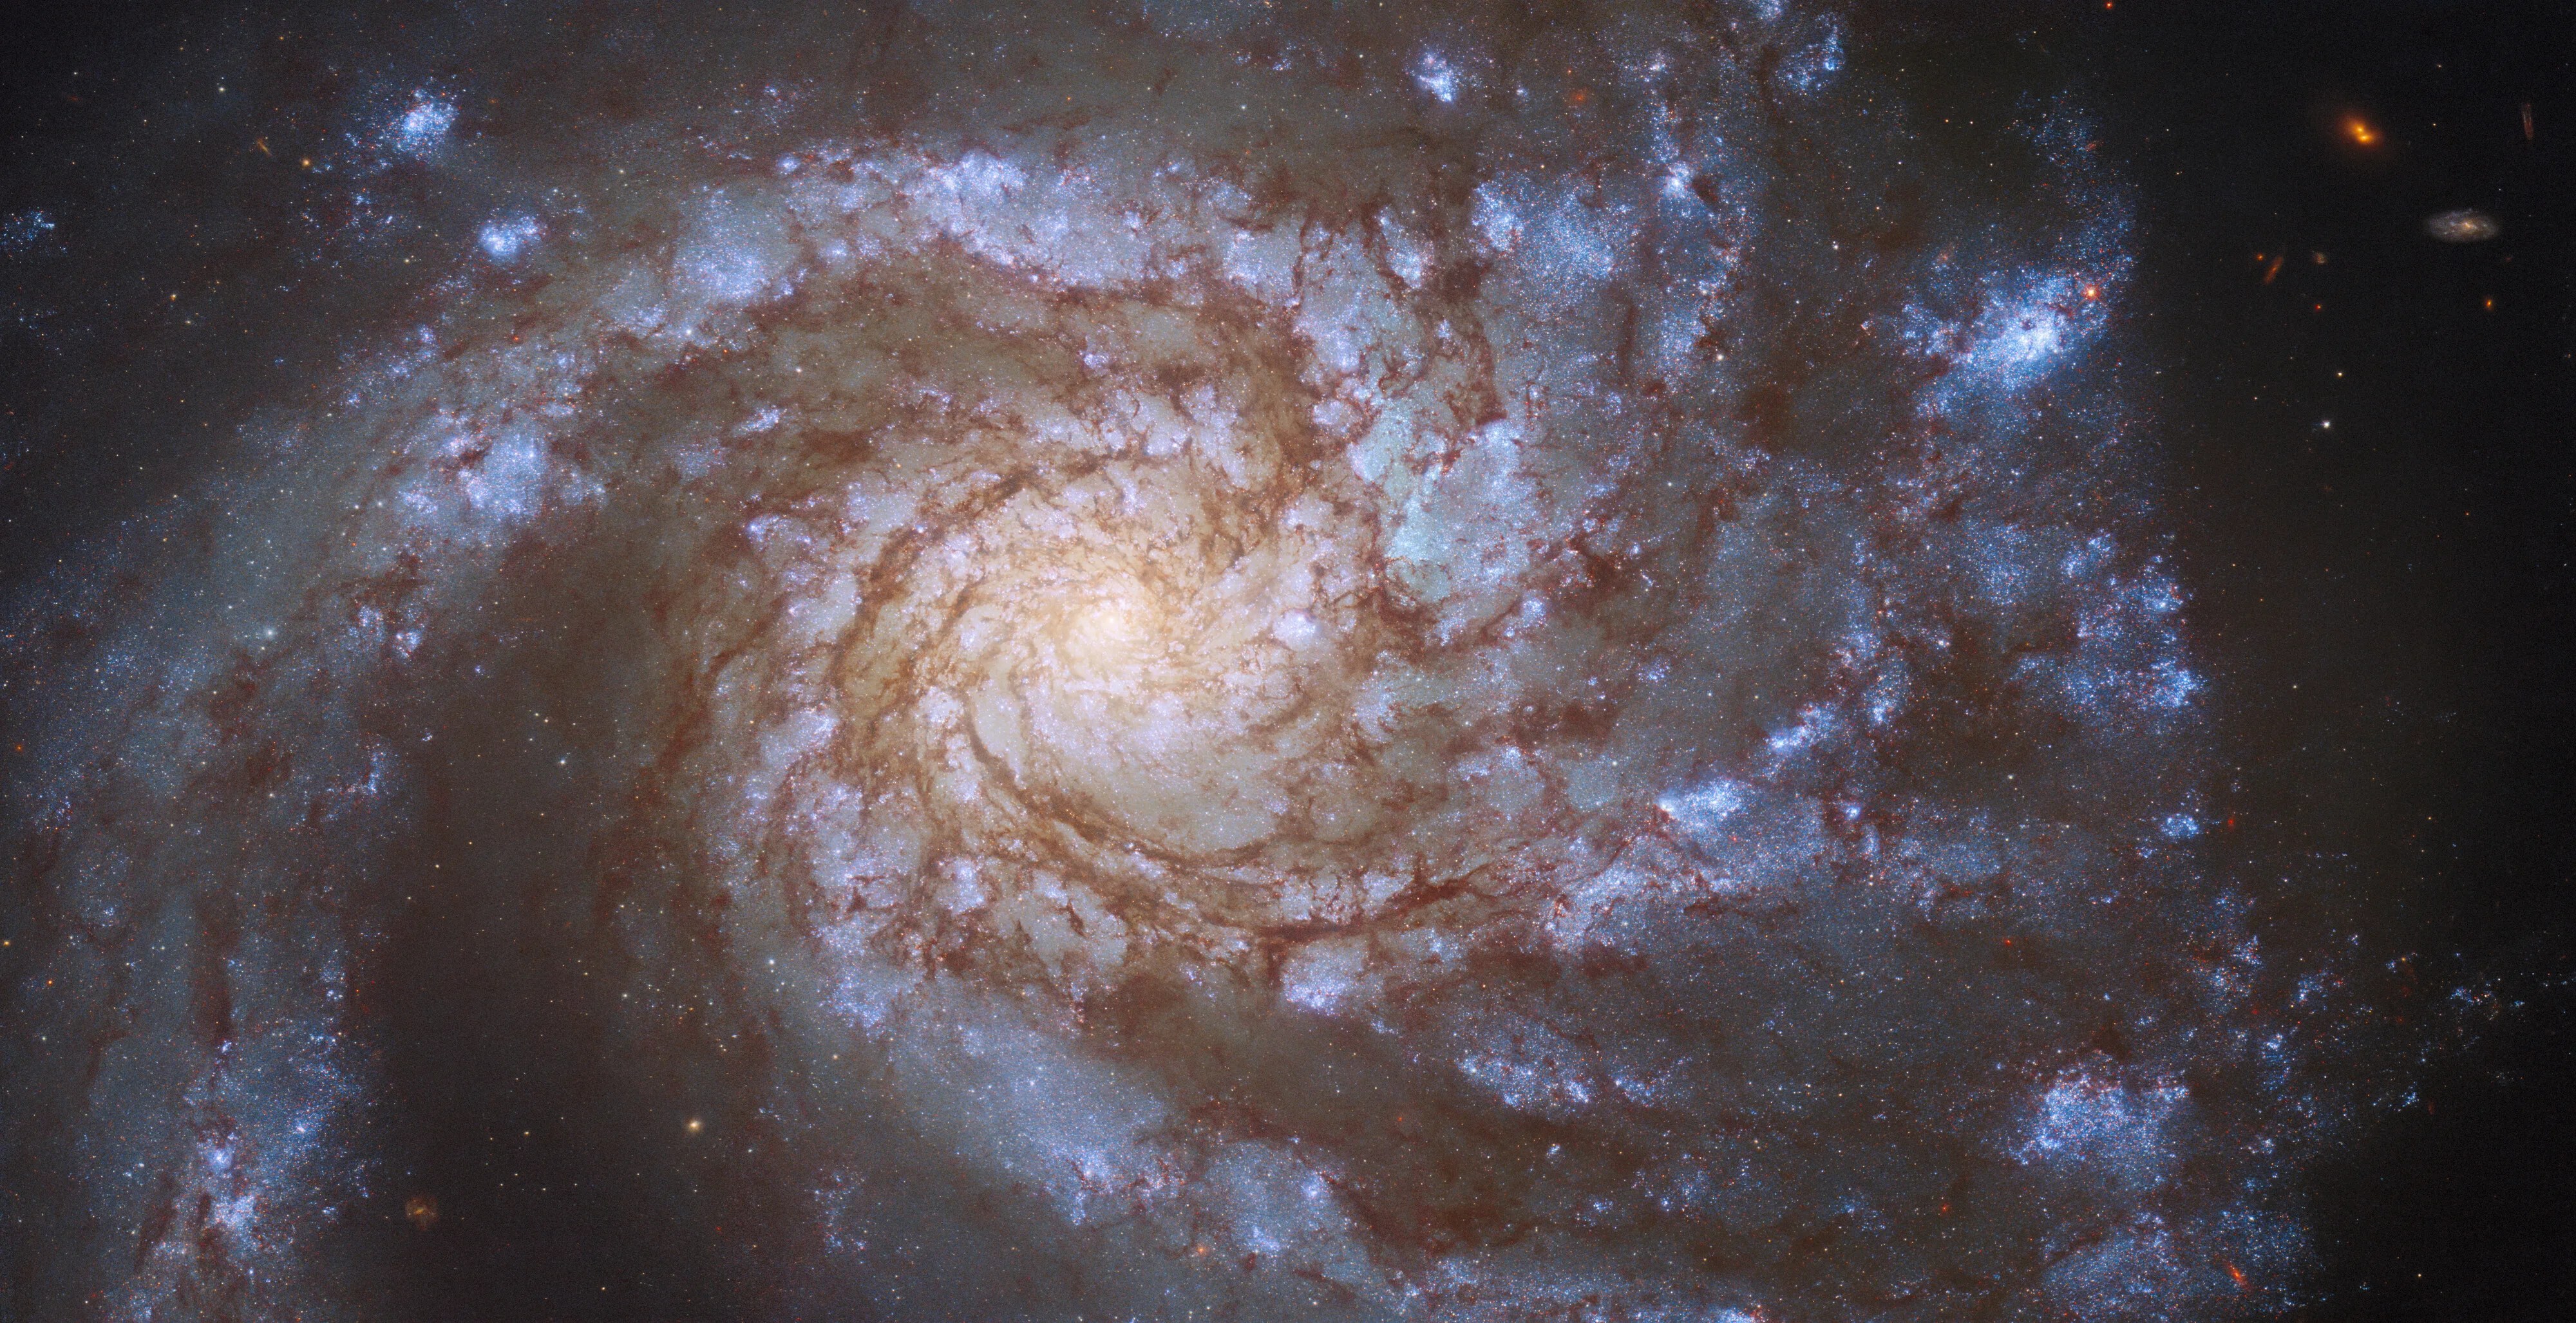 Face-on spiral galaxy, with a bright yellow-white core. spiral arms sweep out from the core, reddish-brown dust lanes outline the inner part of the arms.